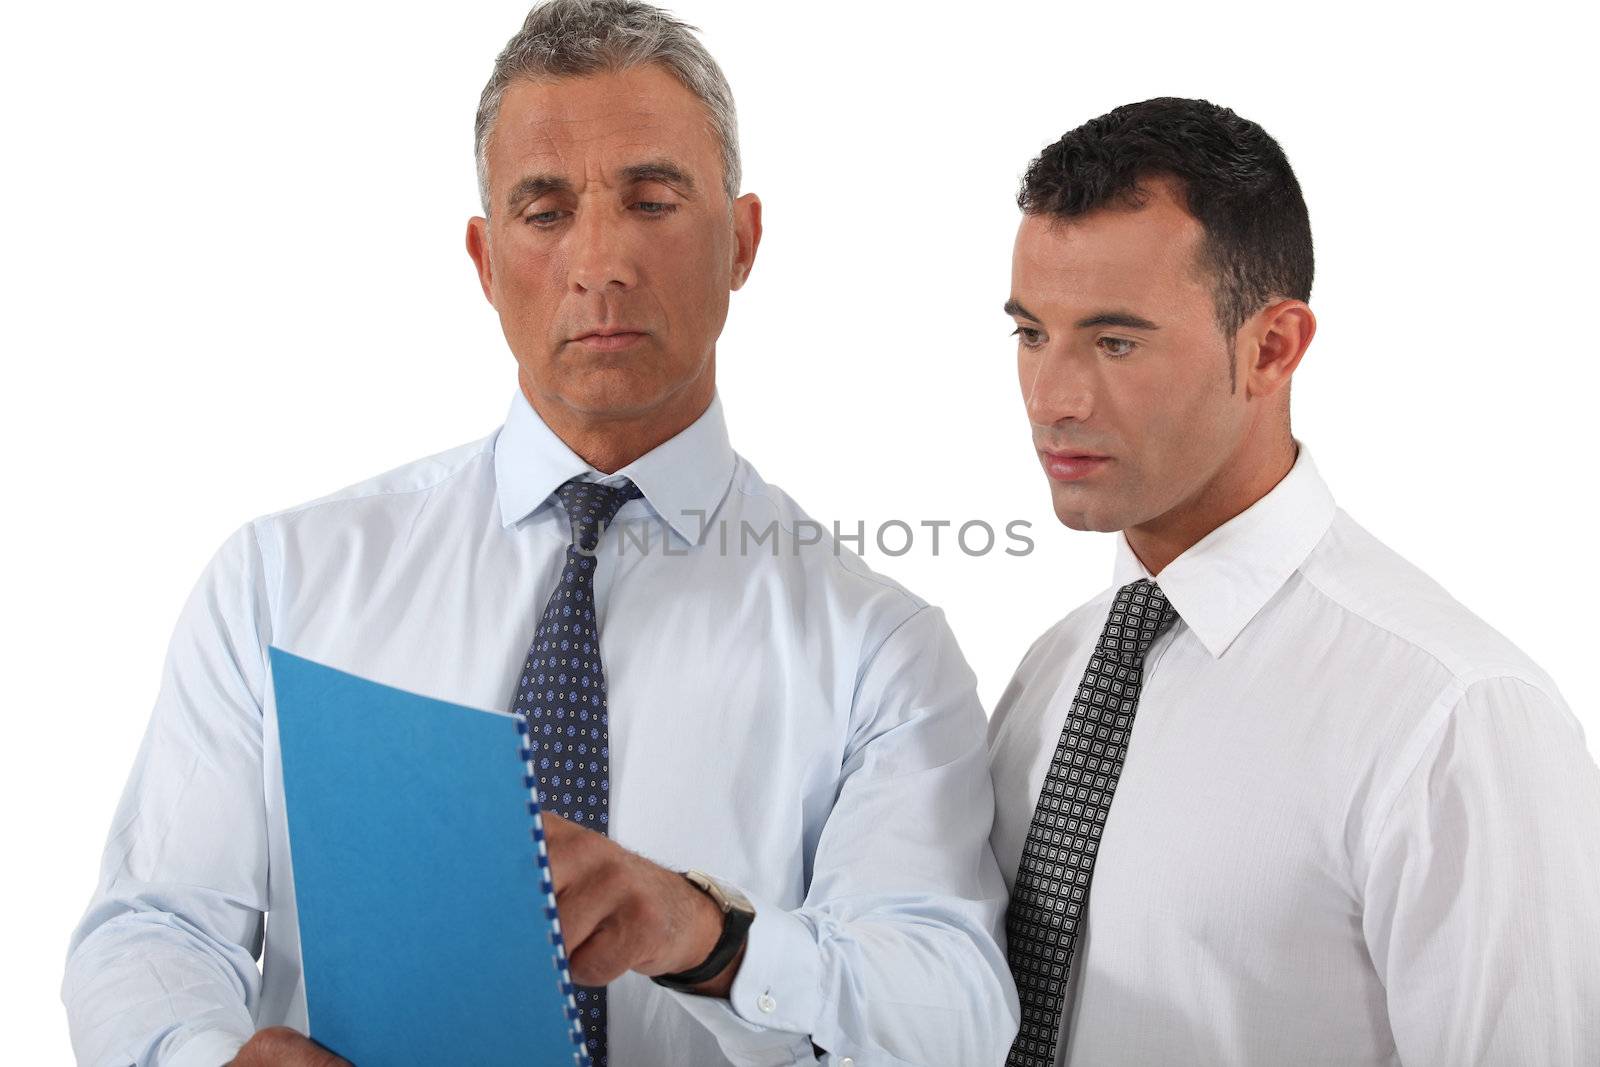 businessman showing a report to a colleague